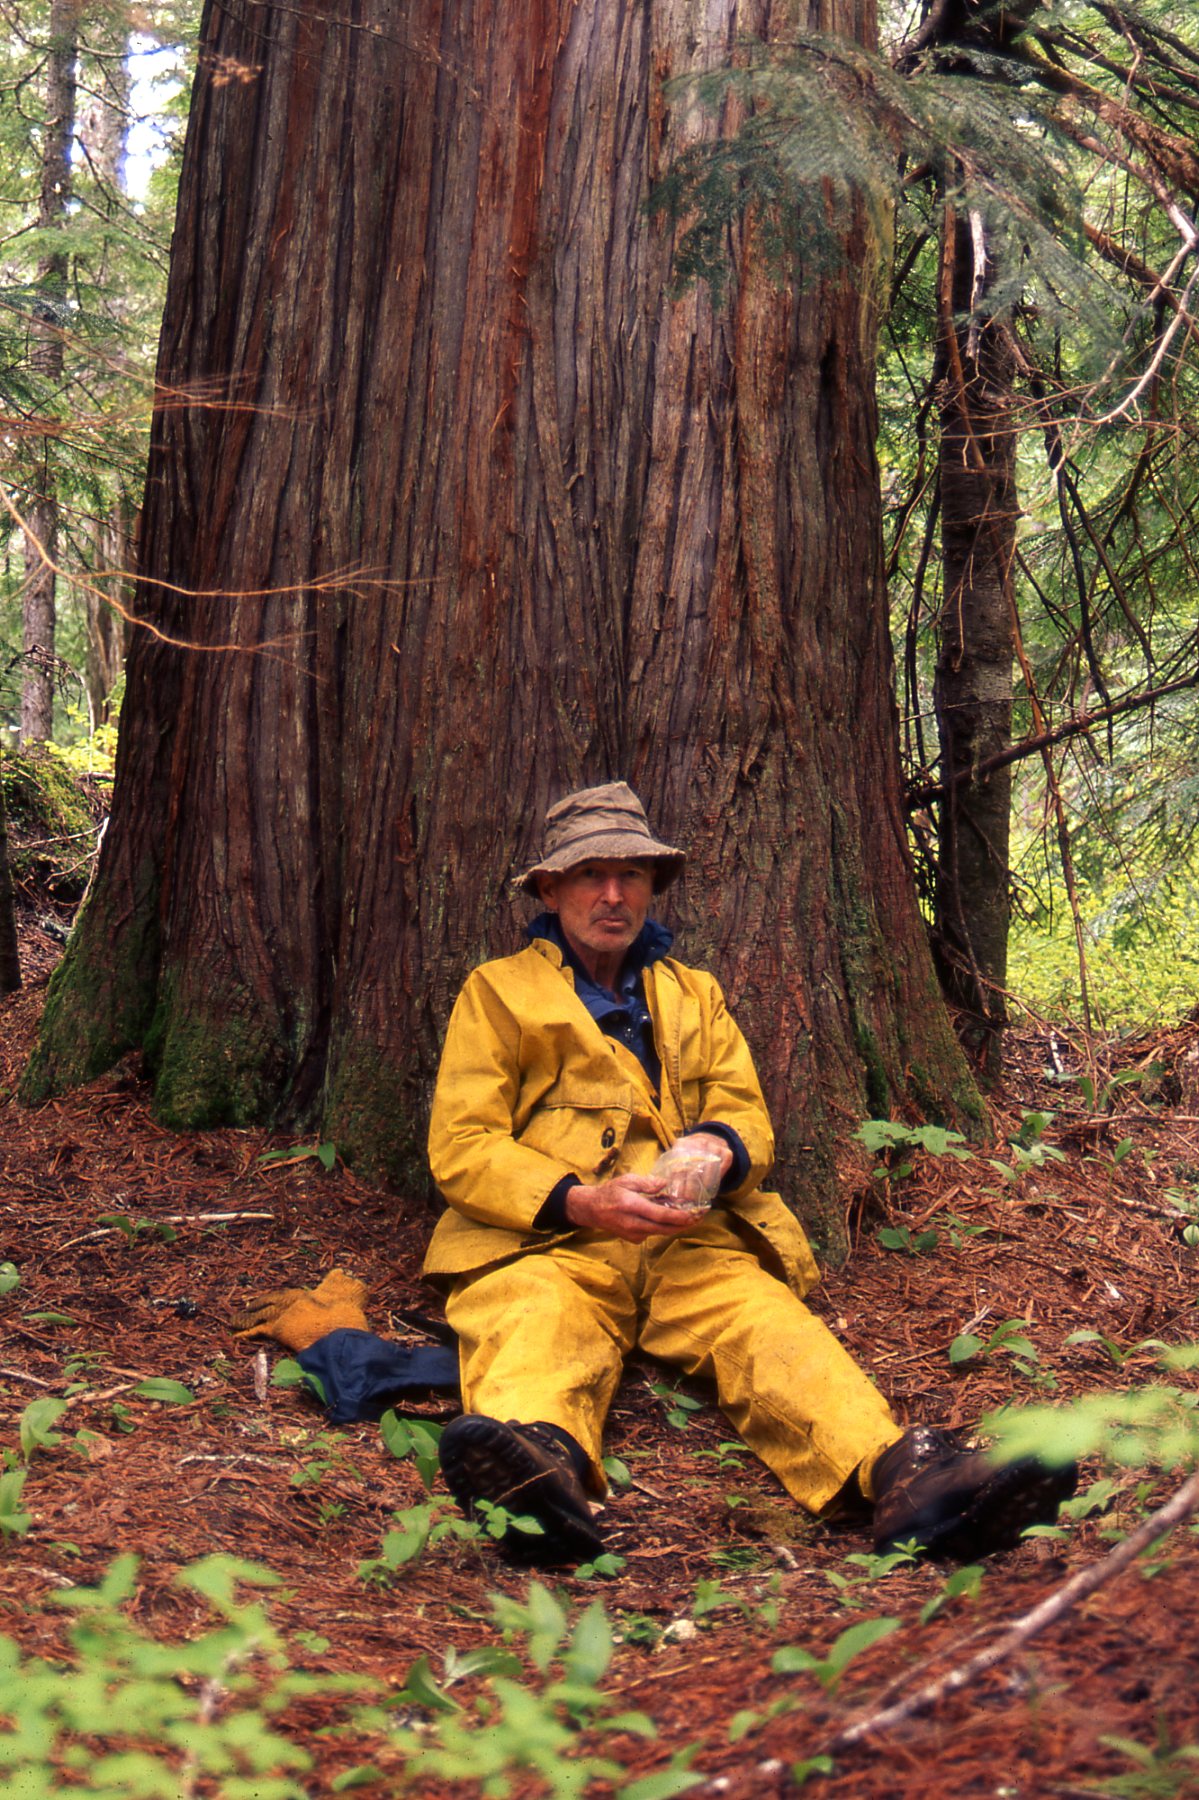 Don in his yellow rainsuit sitting at the base of a big old cedar tree, enjoying a rest and a snack.